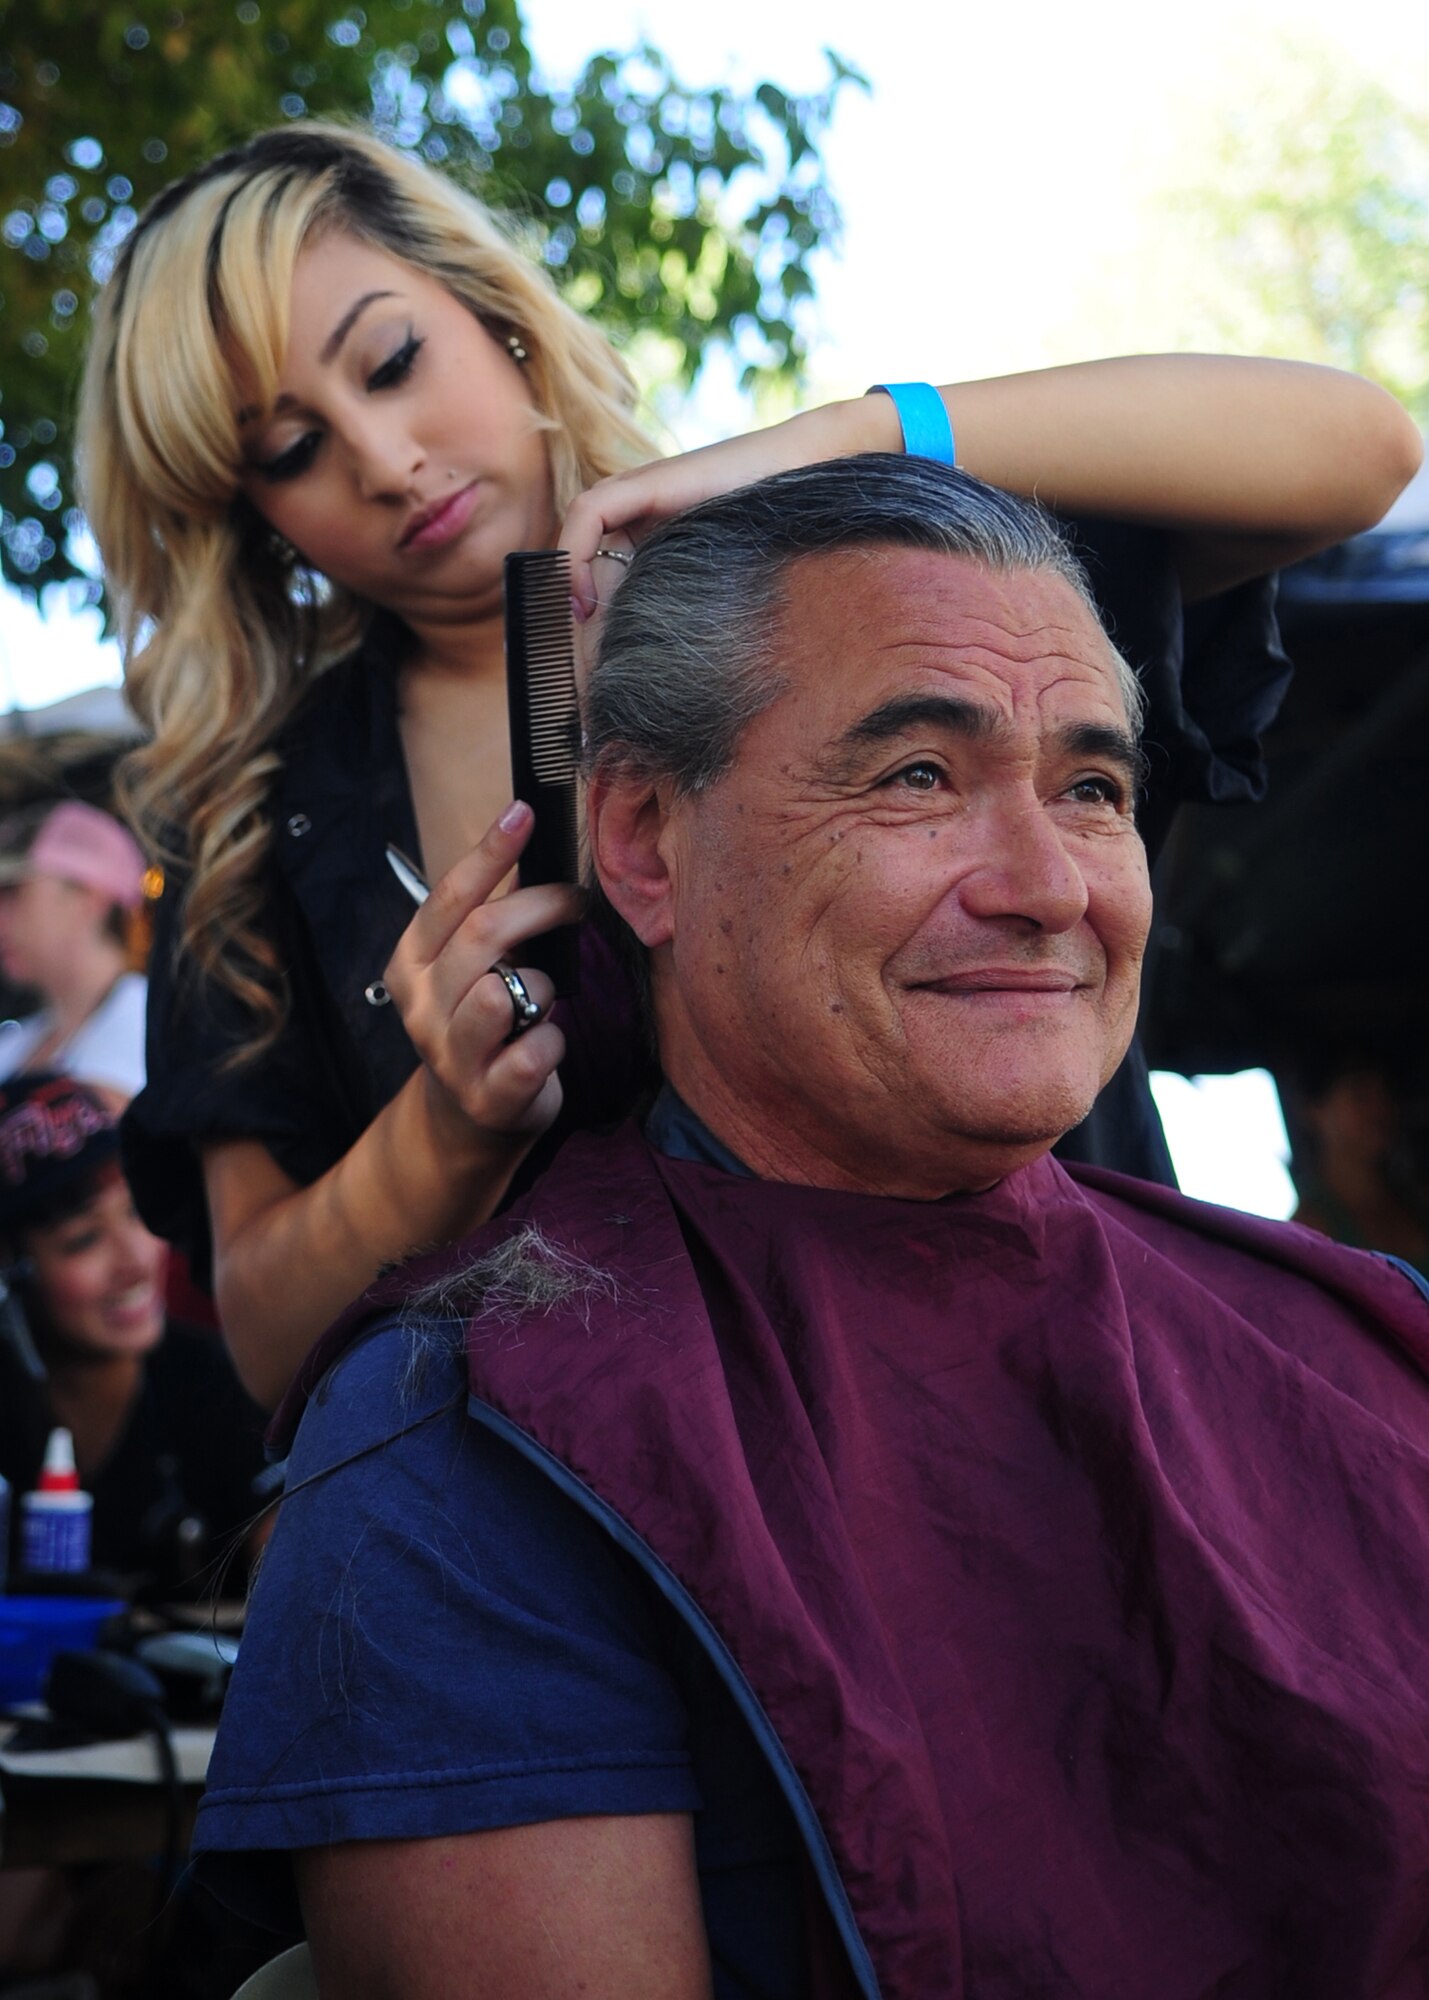 Patricia Gonzalez, from the Sacramento Federico Beauty Institute, cuts the hair of Steve Neisser, U.S. Army veteran, during the 2012 Veteran's Stand Down at River Bottoms Park in Marysville, Calif., August 24, 2012. The annual stand down provided basic needs, such as medical, financial, mental and religious services to veterans and their families and especially targeted homeless and less fortunate veterans. (U.S. Air Force photo by Senior Airman Shawn Nickel)